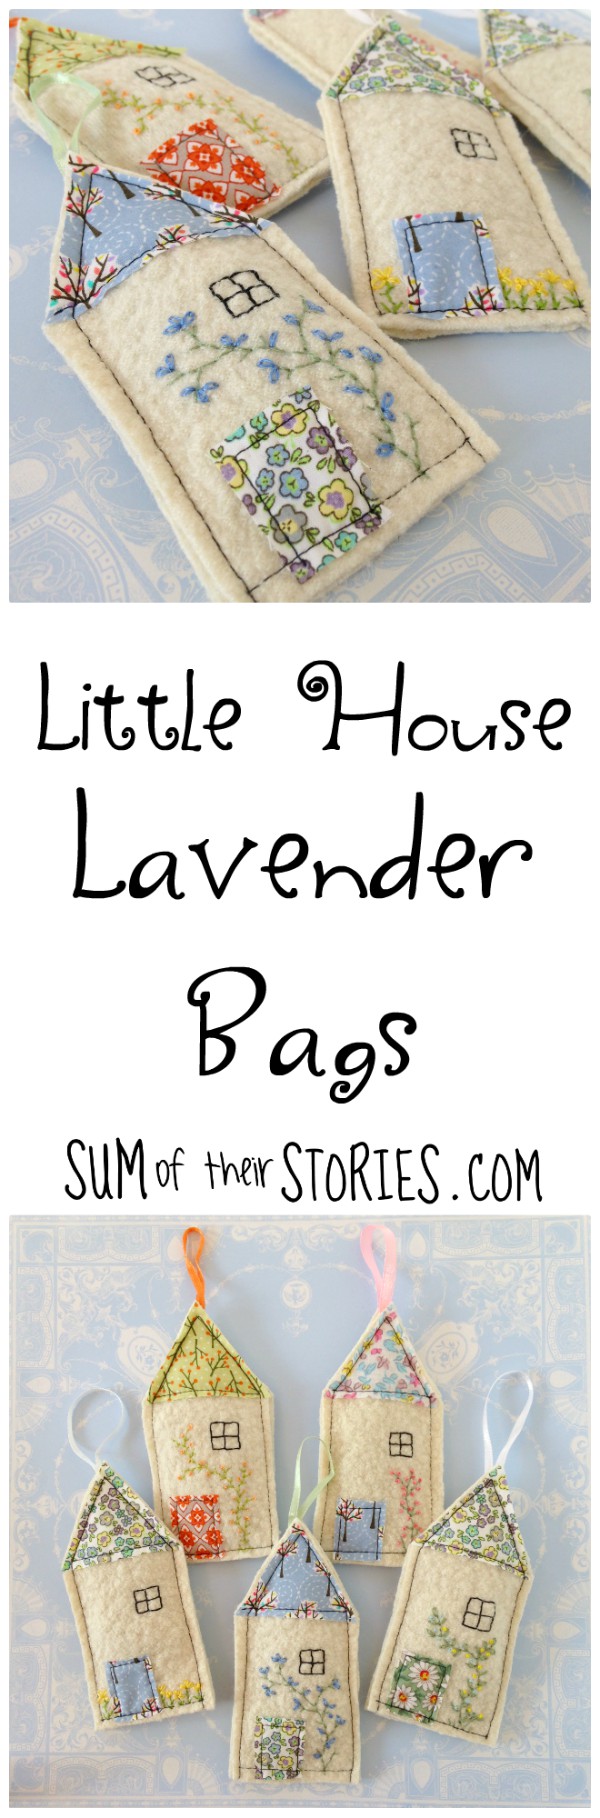 Little house embroidered lavender bags